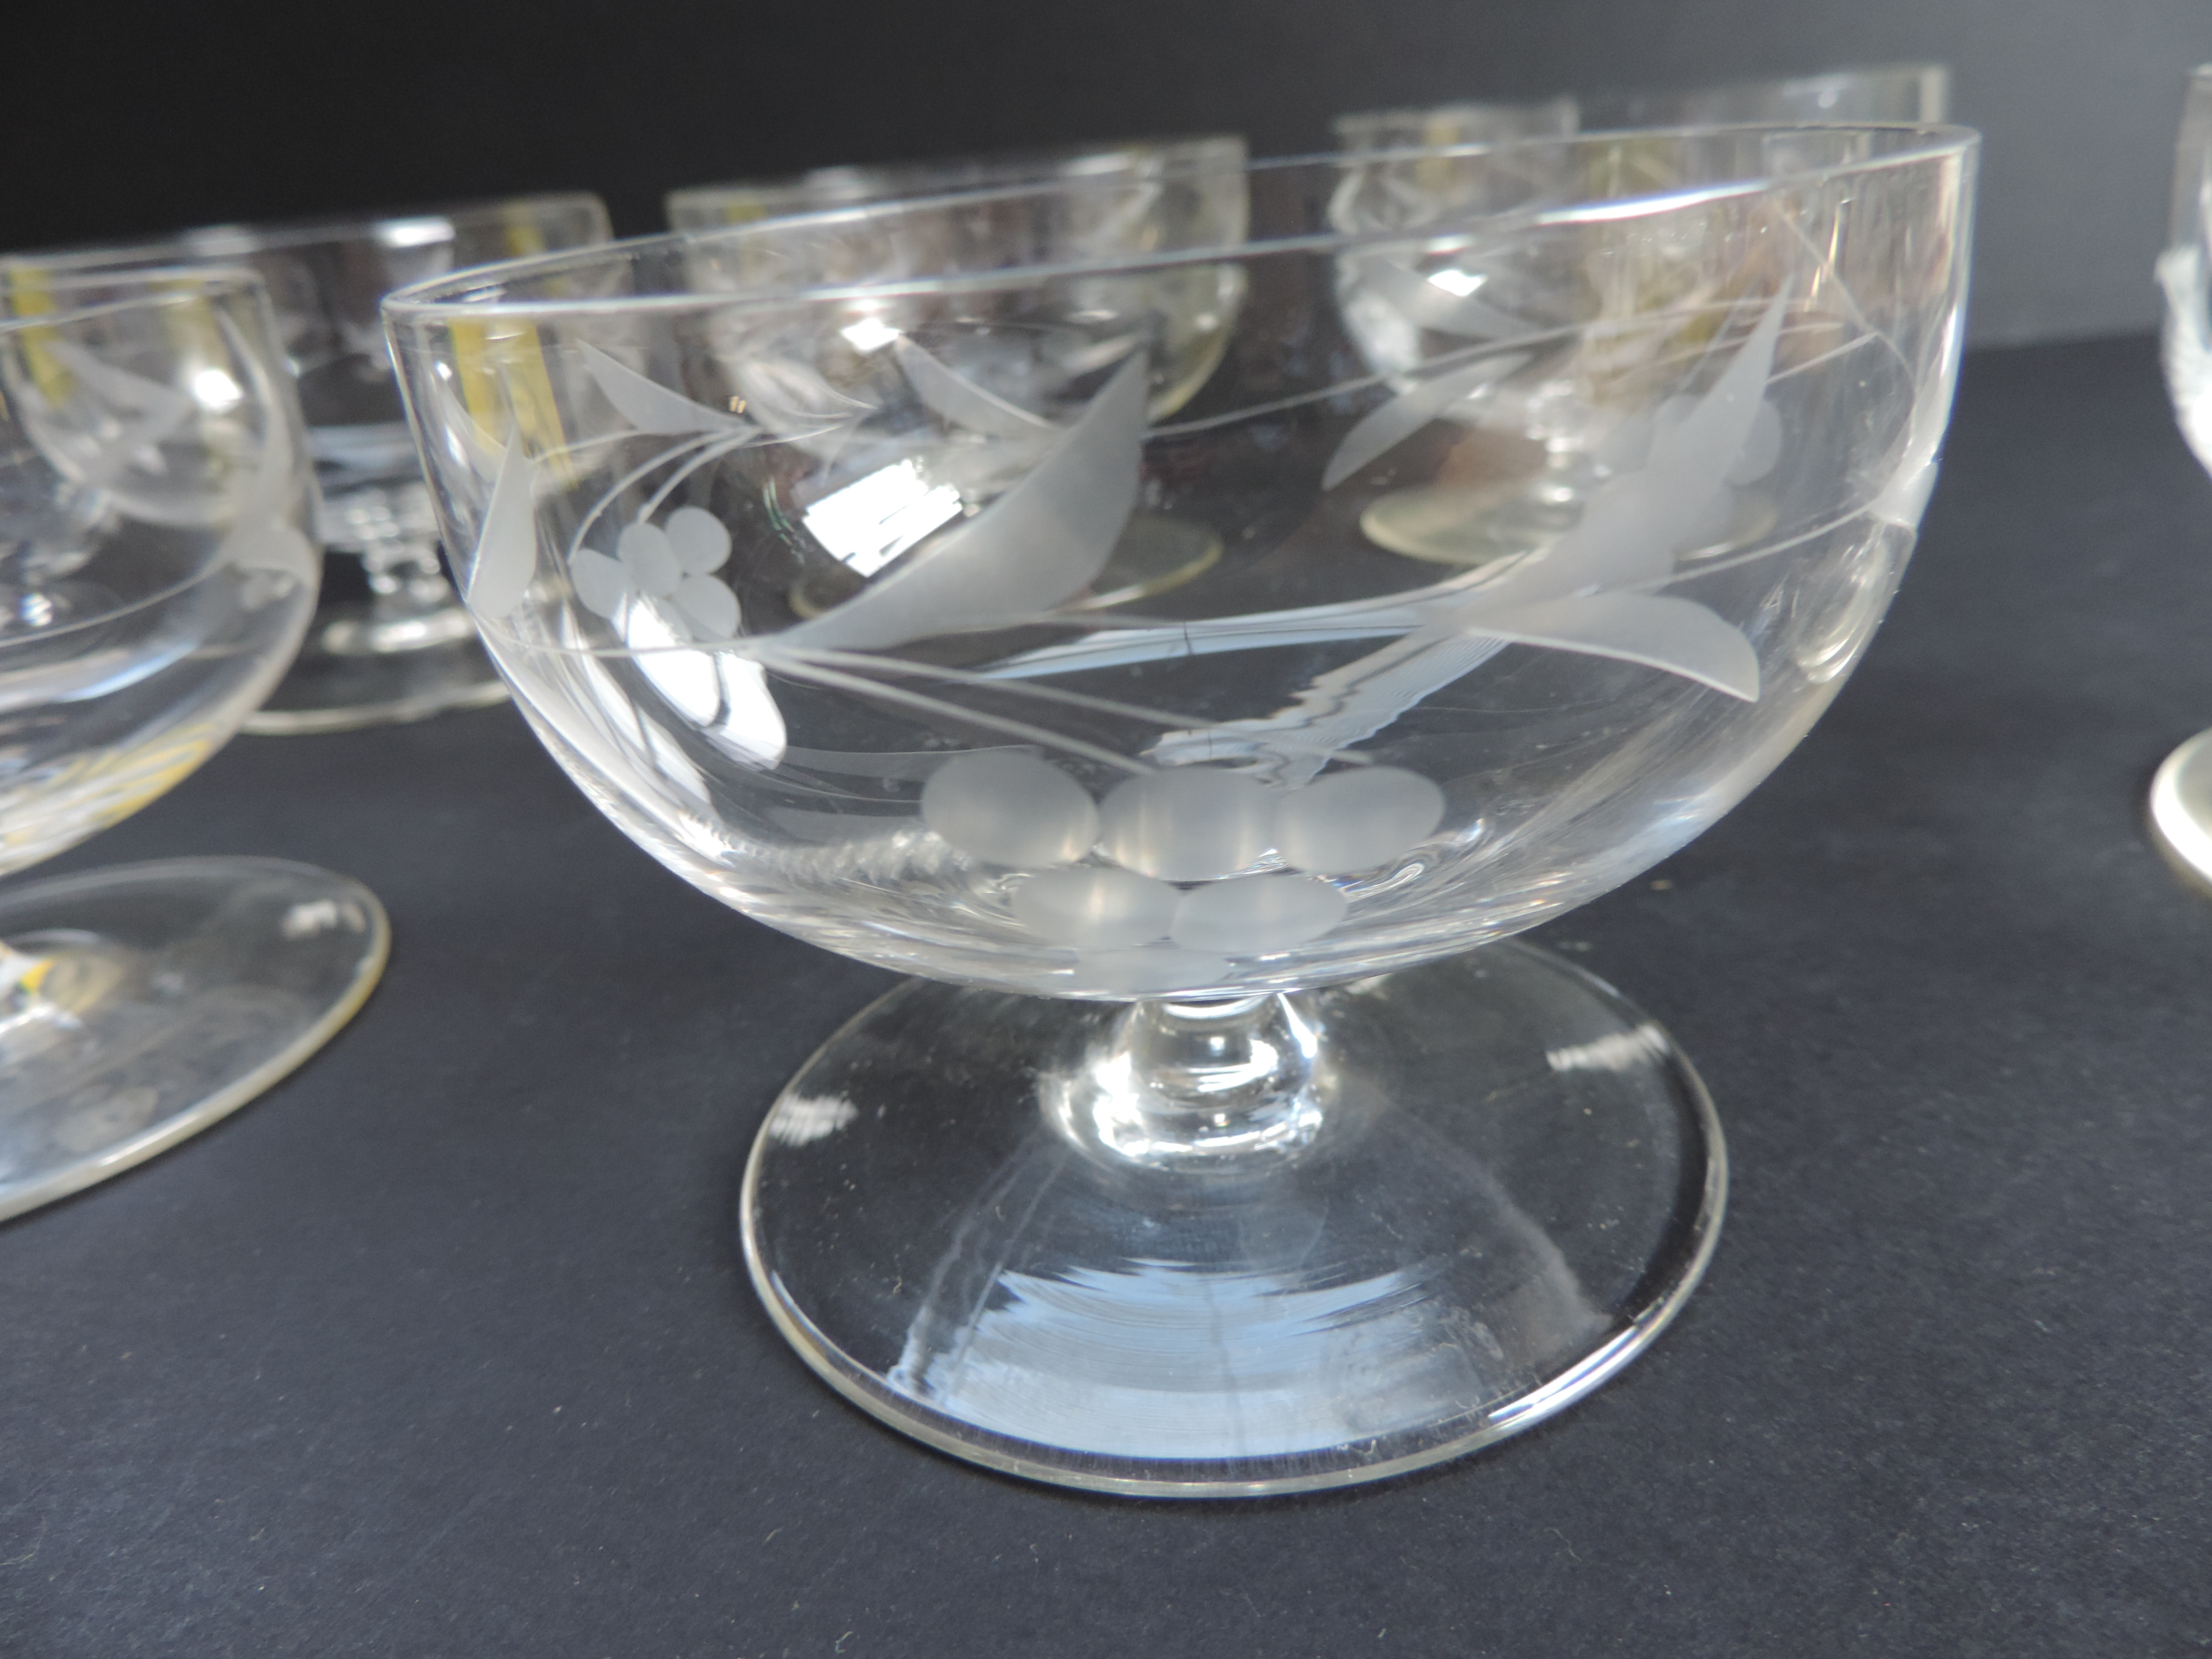 Antique Etched Glass Dessert/Ice Cream/Sorbet Dishes - Image 3 of 3